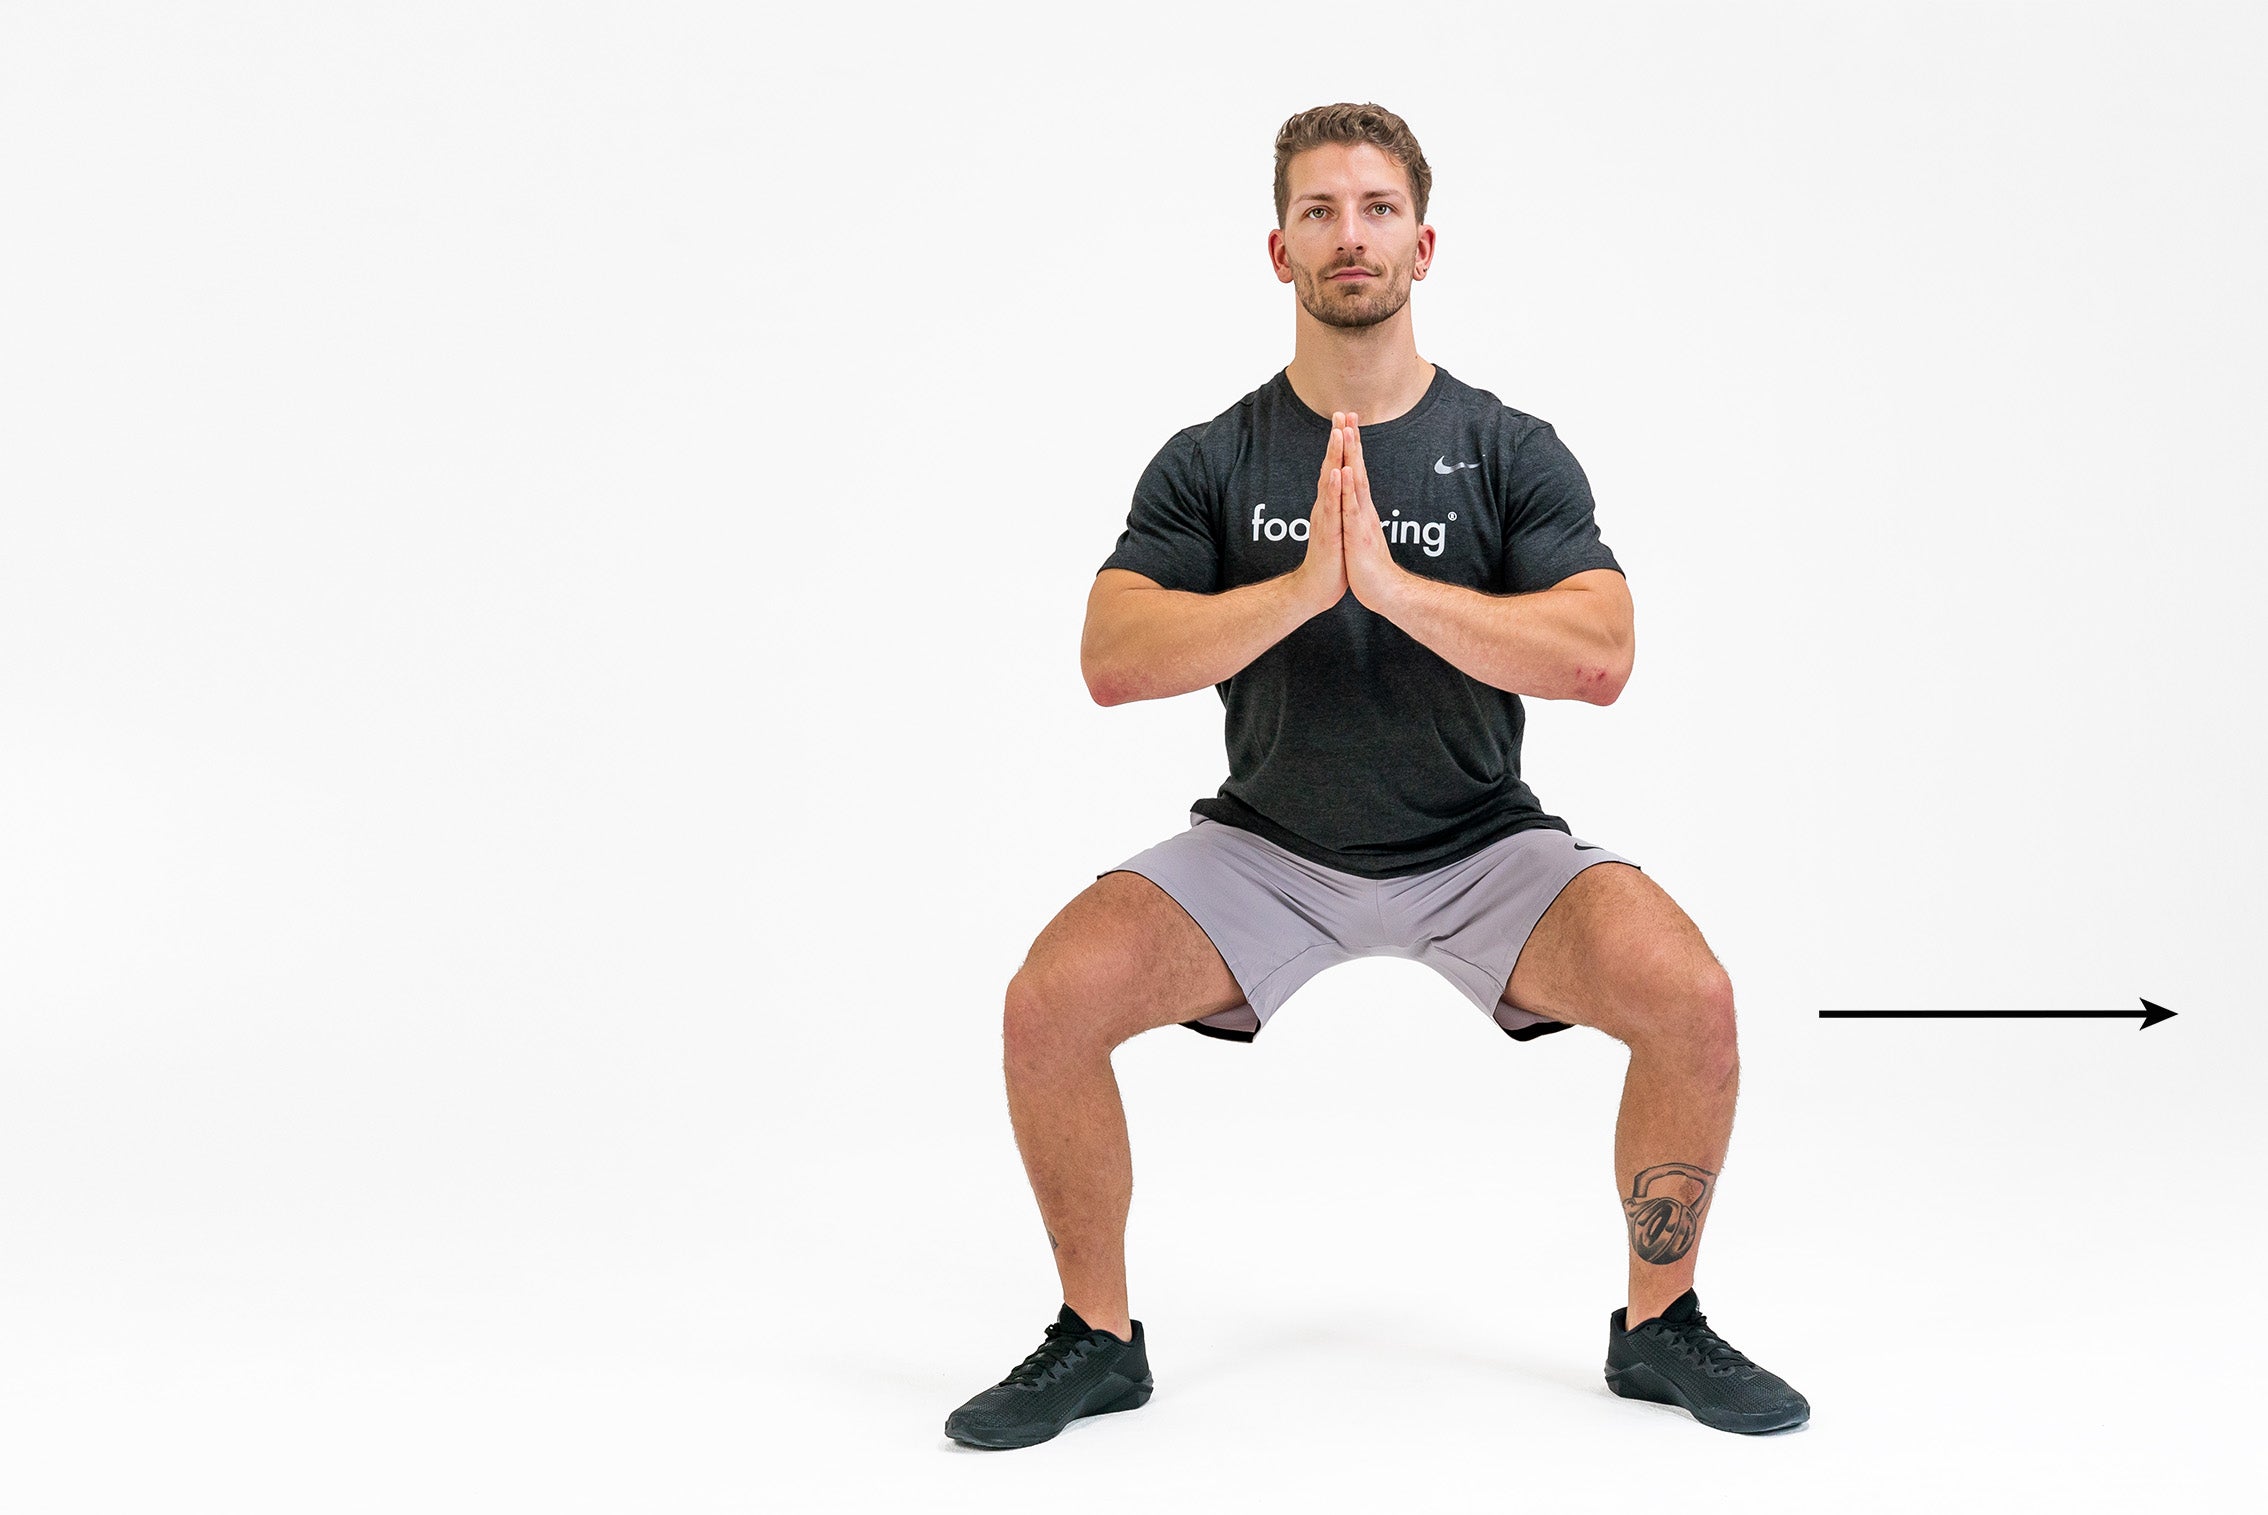 A white man in a black foodspring t-shirt demonstrates the position for a crab squat walk, while a black arrow points to his left indicating which direction he is about to go.